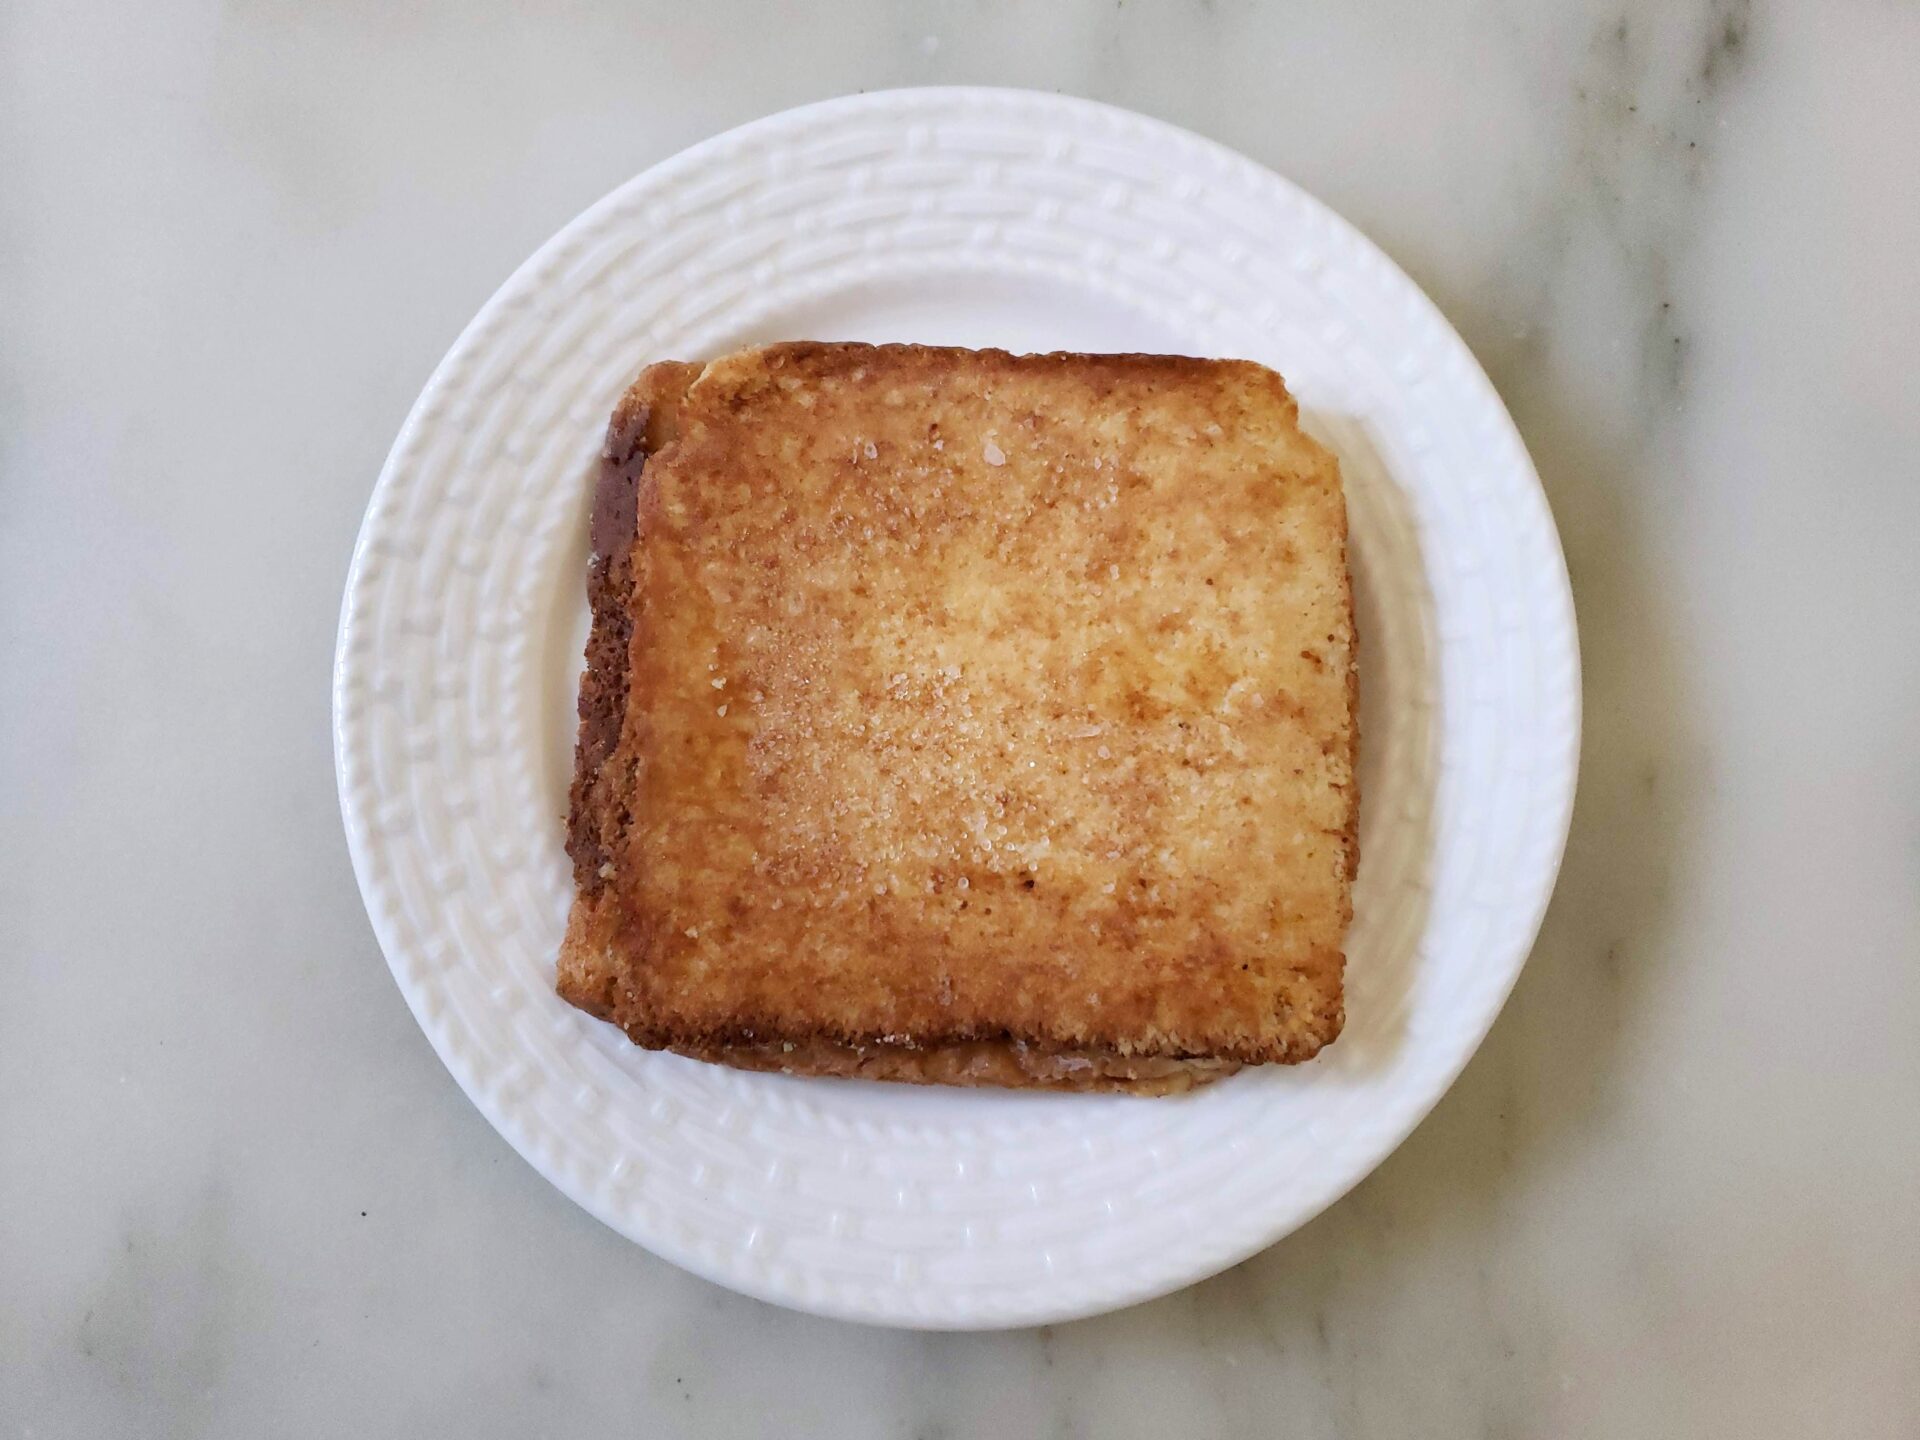 Frozen-Grilled-Cheese-Sandwich-from-Costco